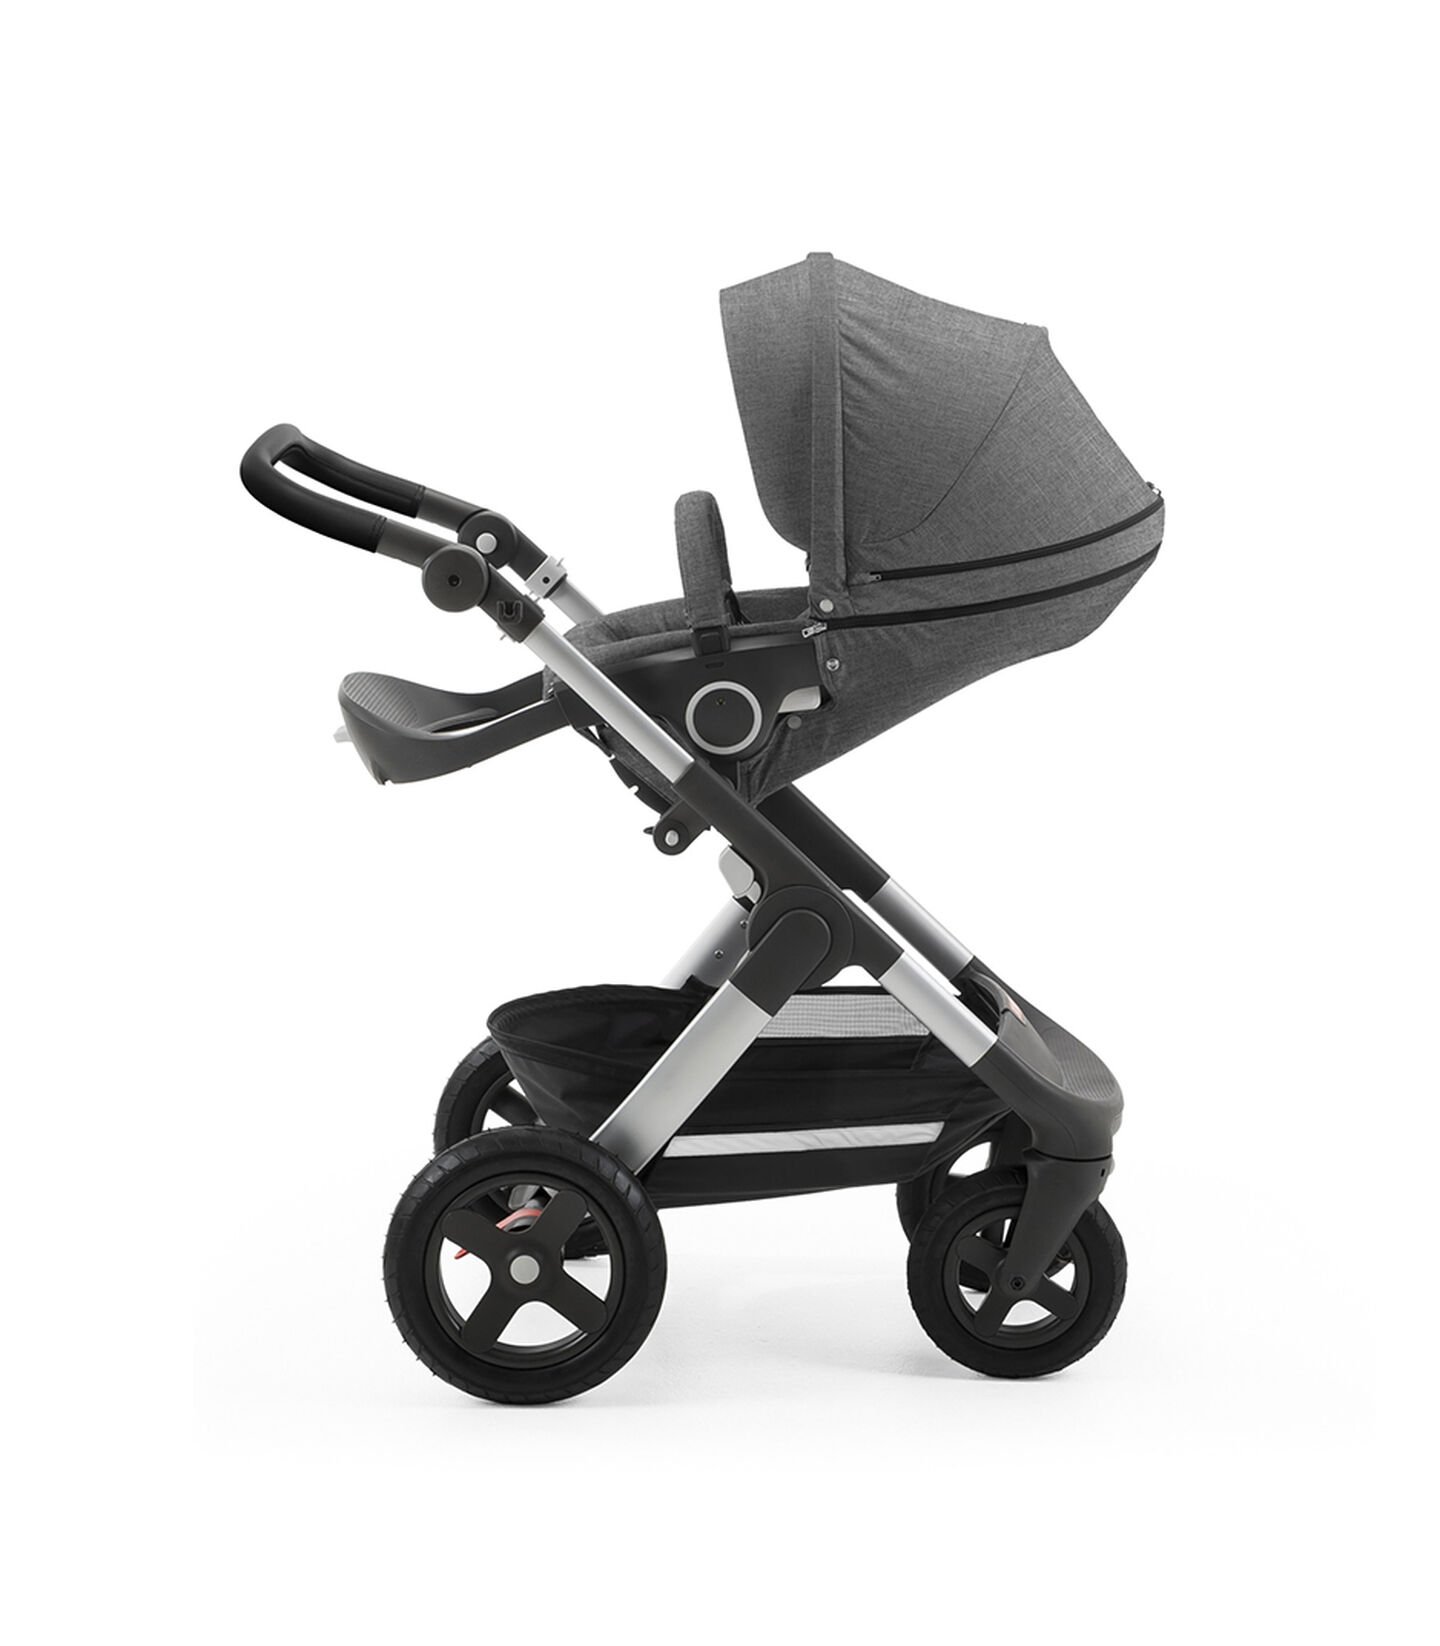 Stokke® Trailz with silver chassis and Stokke® Stroller Seat, parent facing, sleep position. Black Melange. Terrain wheels. Leatherette Handle. view 3